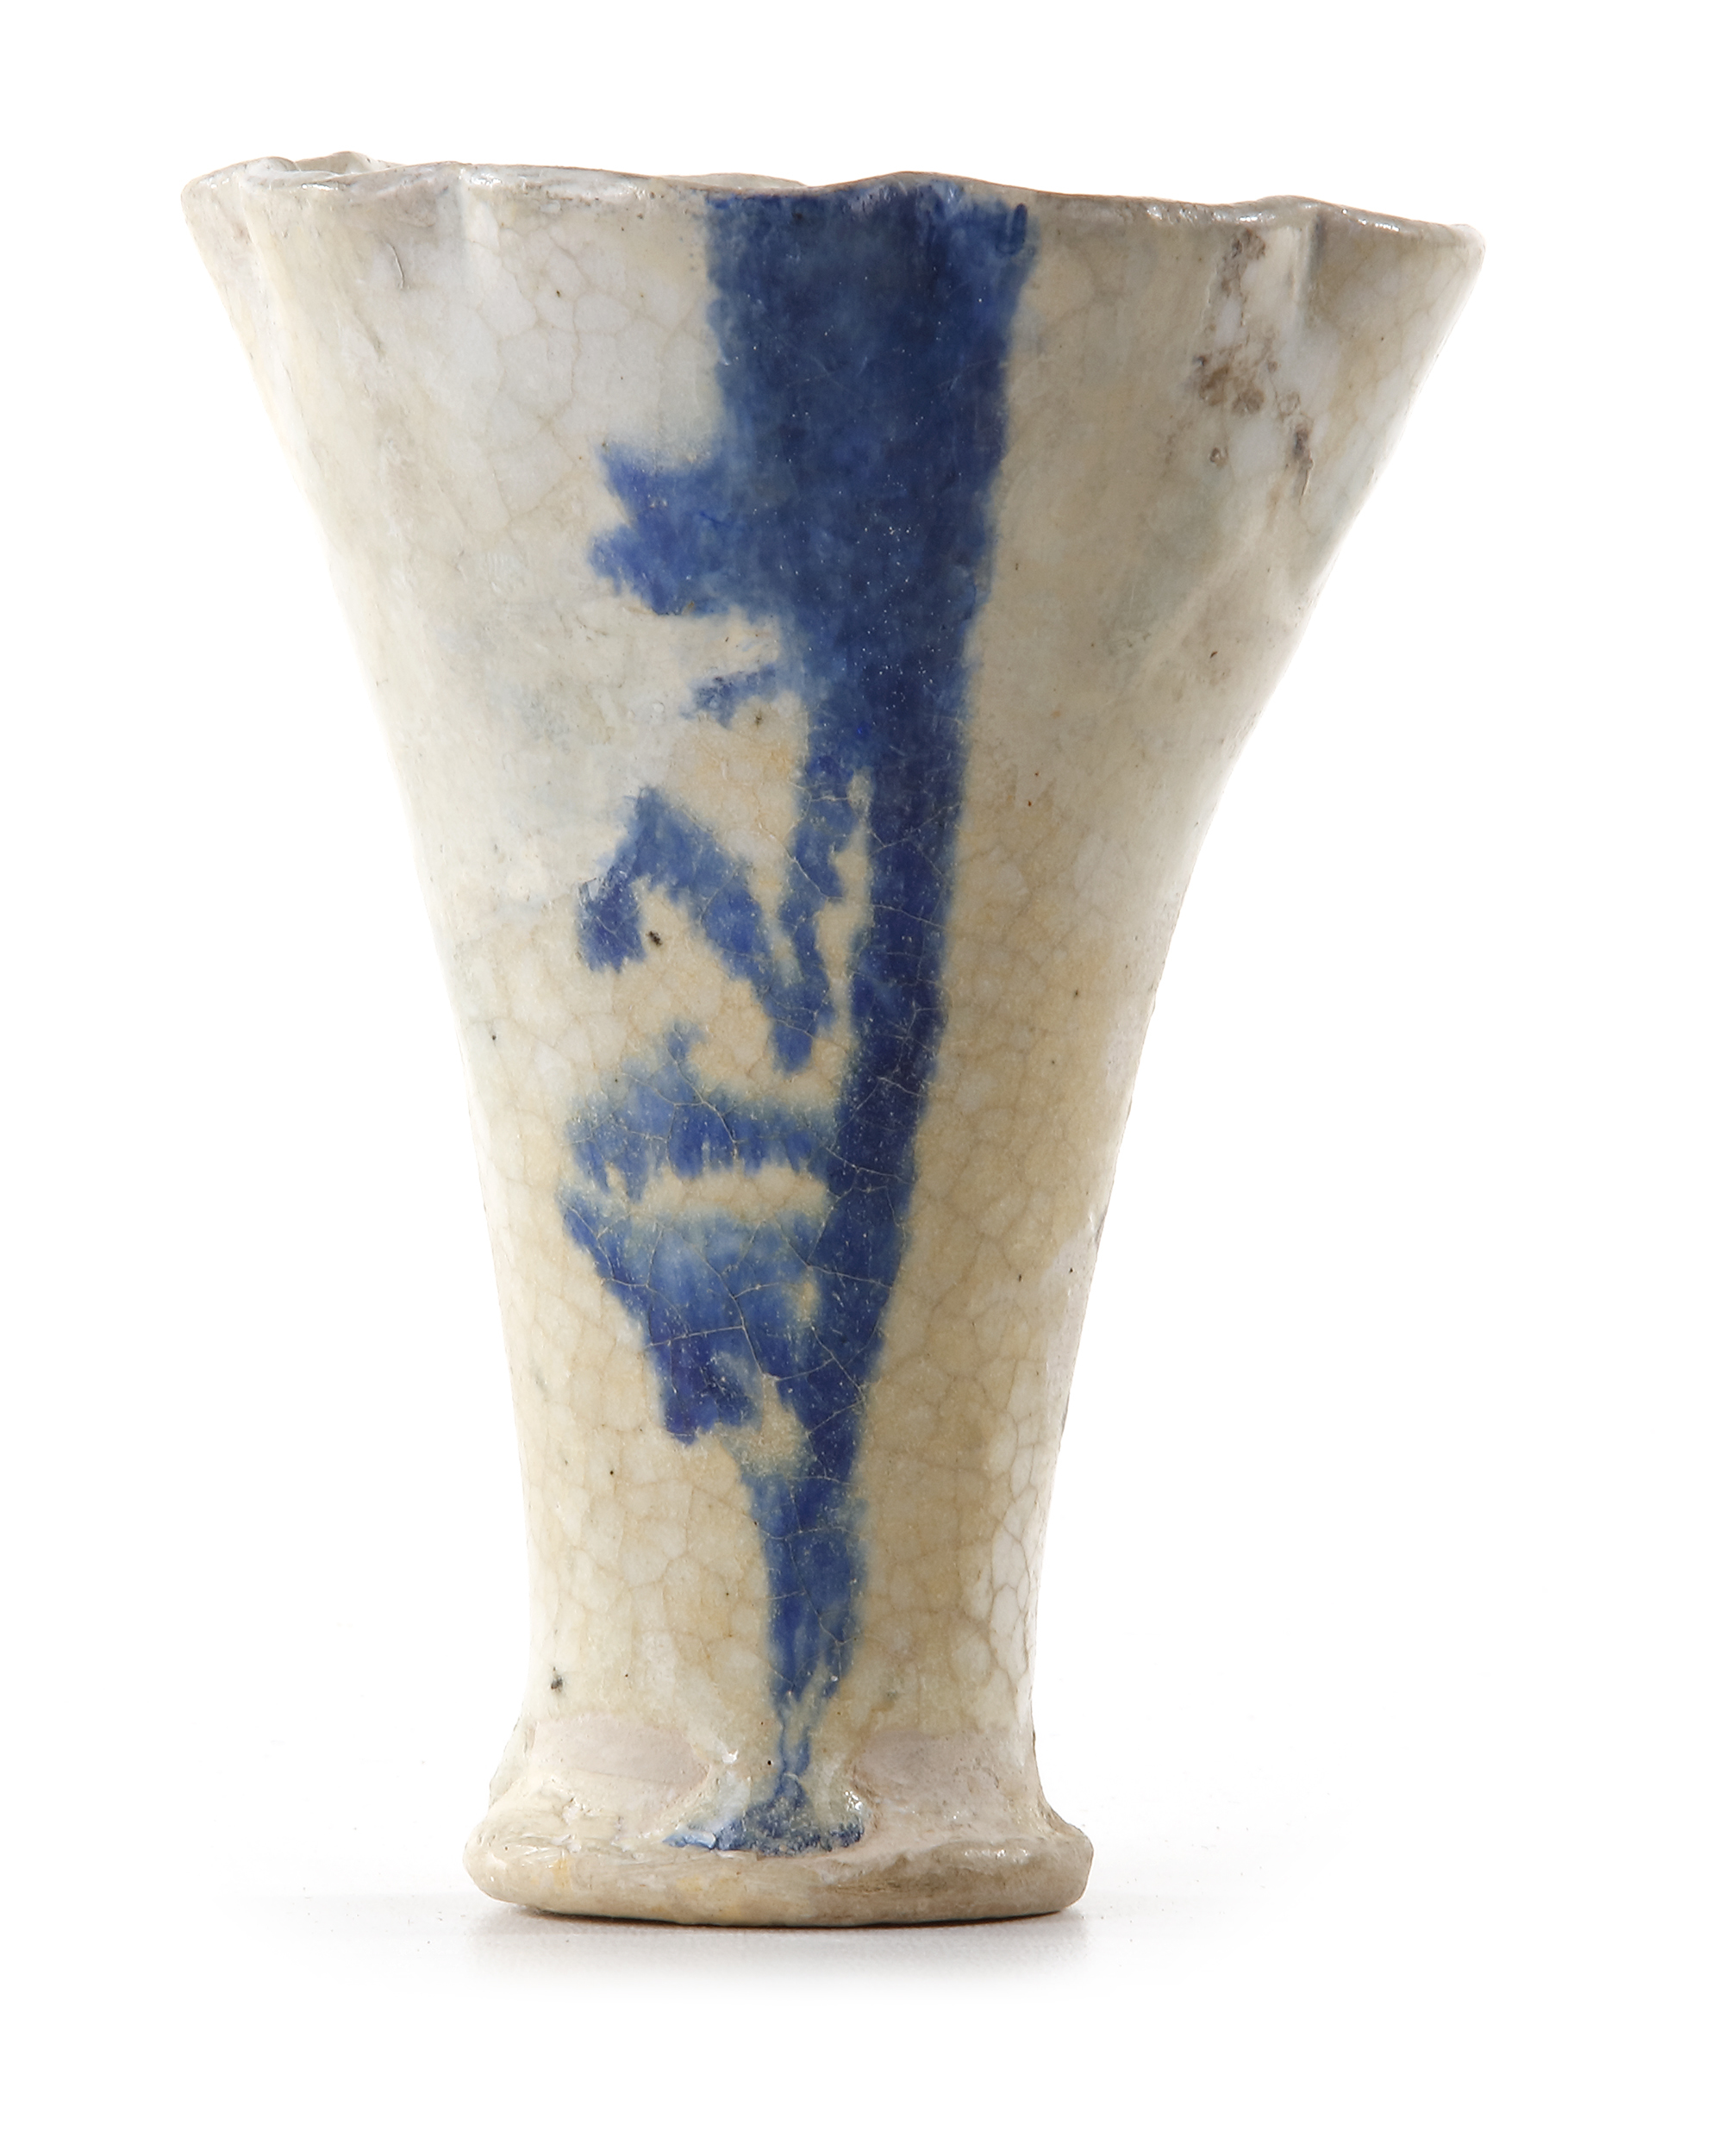 AN ABBASID CALLIGRAPHIC POTTERY CUP, MESOPOTAMIA, 9TH CENTURY - Image 4 of 8